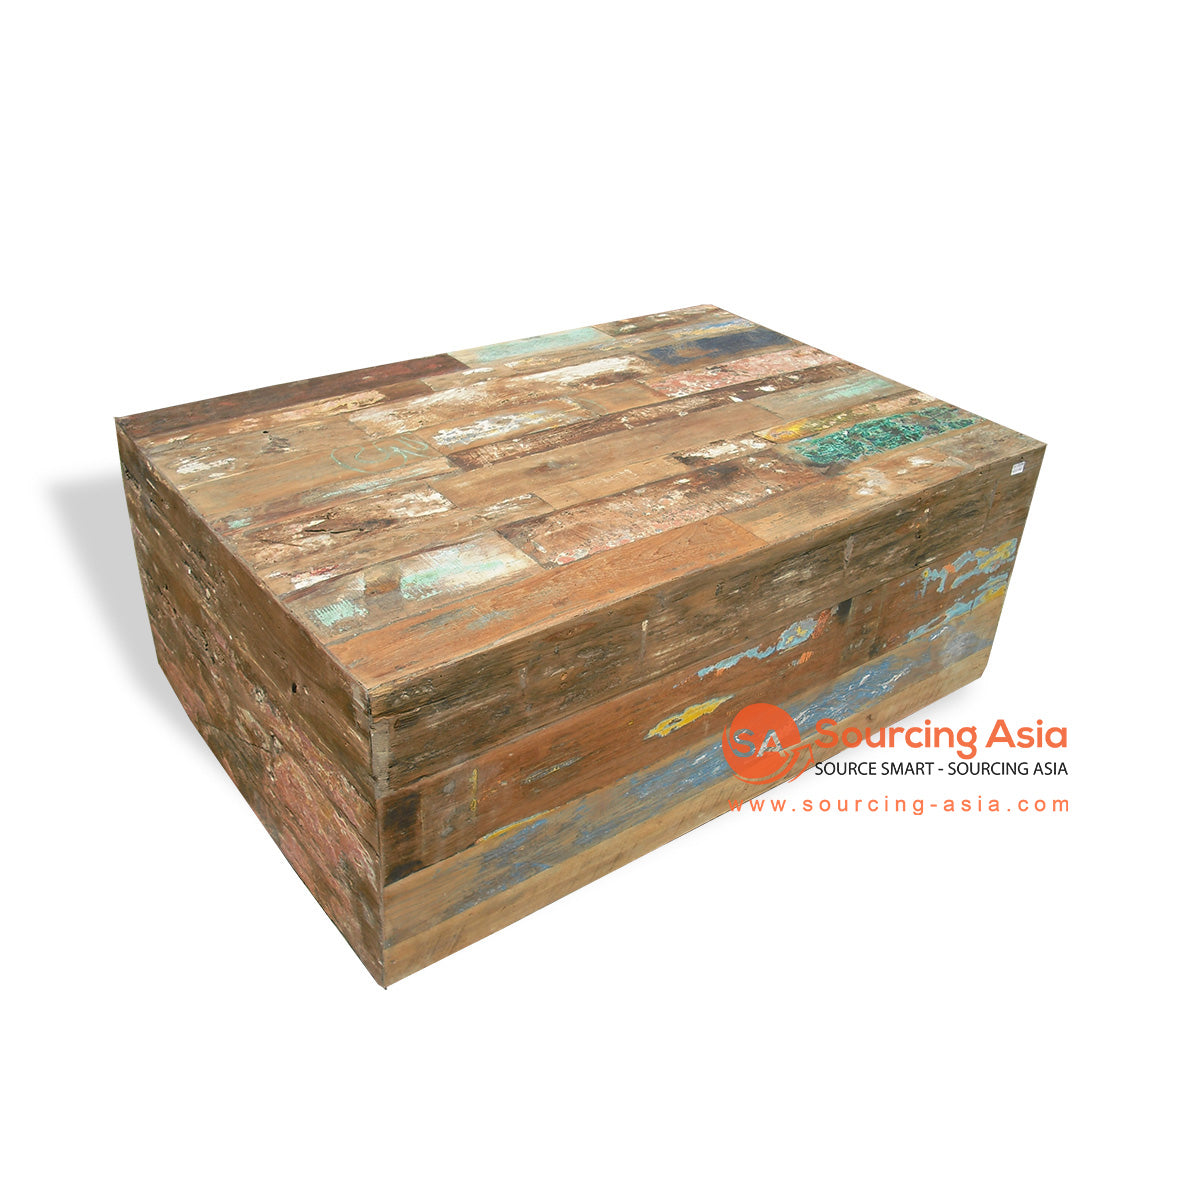 WK005-H45-1 NATURAL RECYCLED BOAT WOOD SQUARE SOLID BLOCK COFFEE TABLE